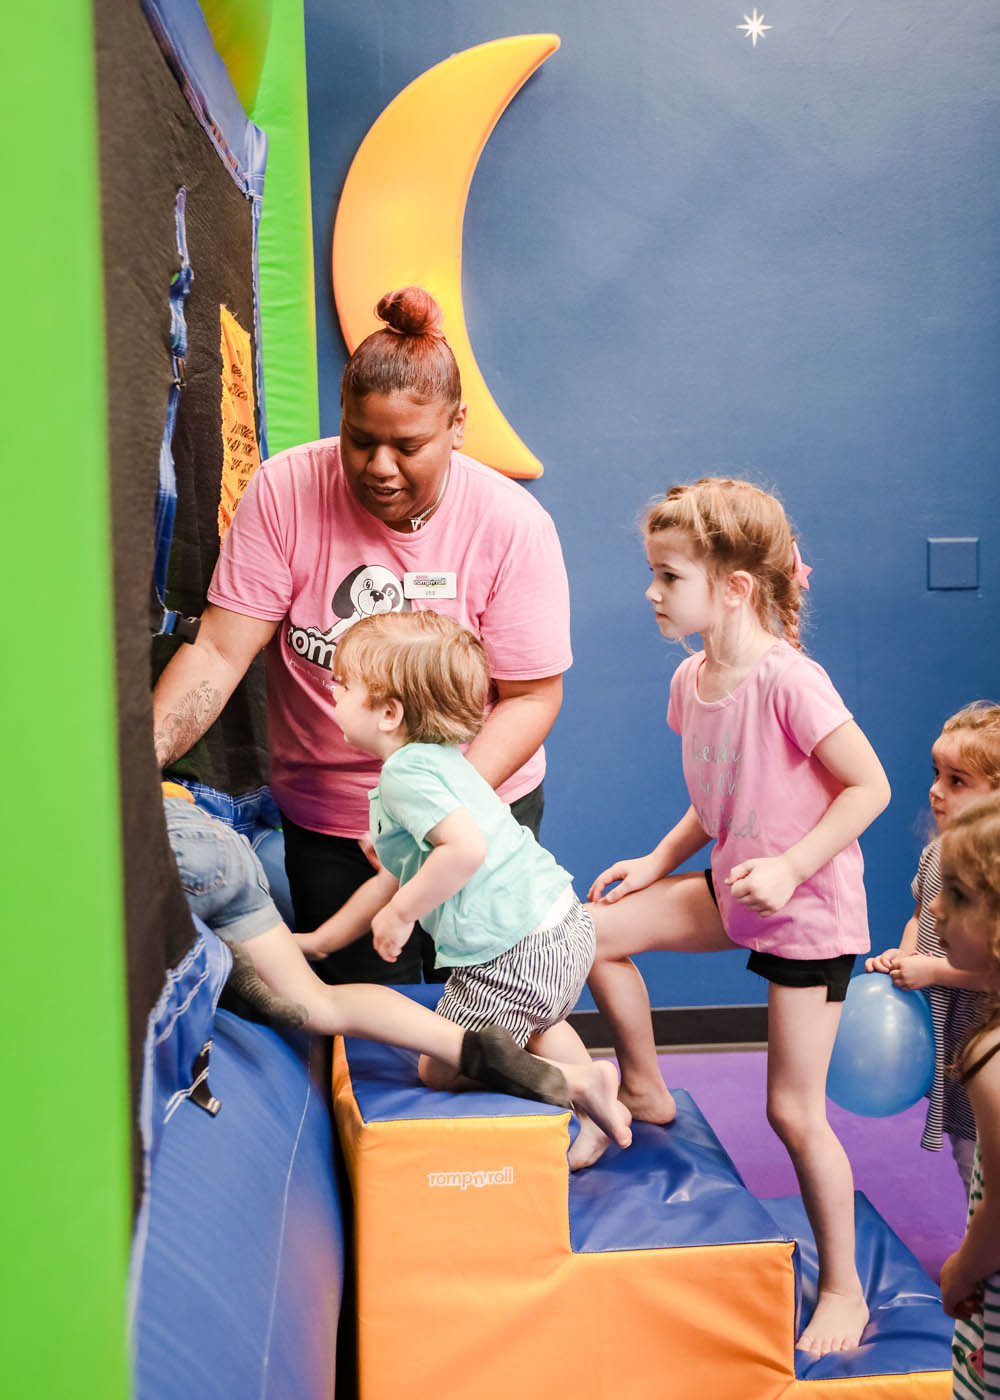 A Romp n' Roll instructor helping children play in our gym - we are a kids gym franchise!